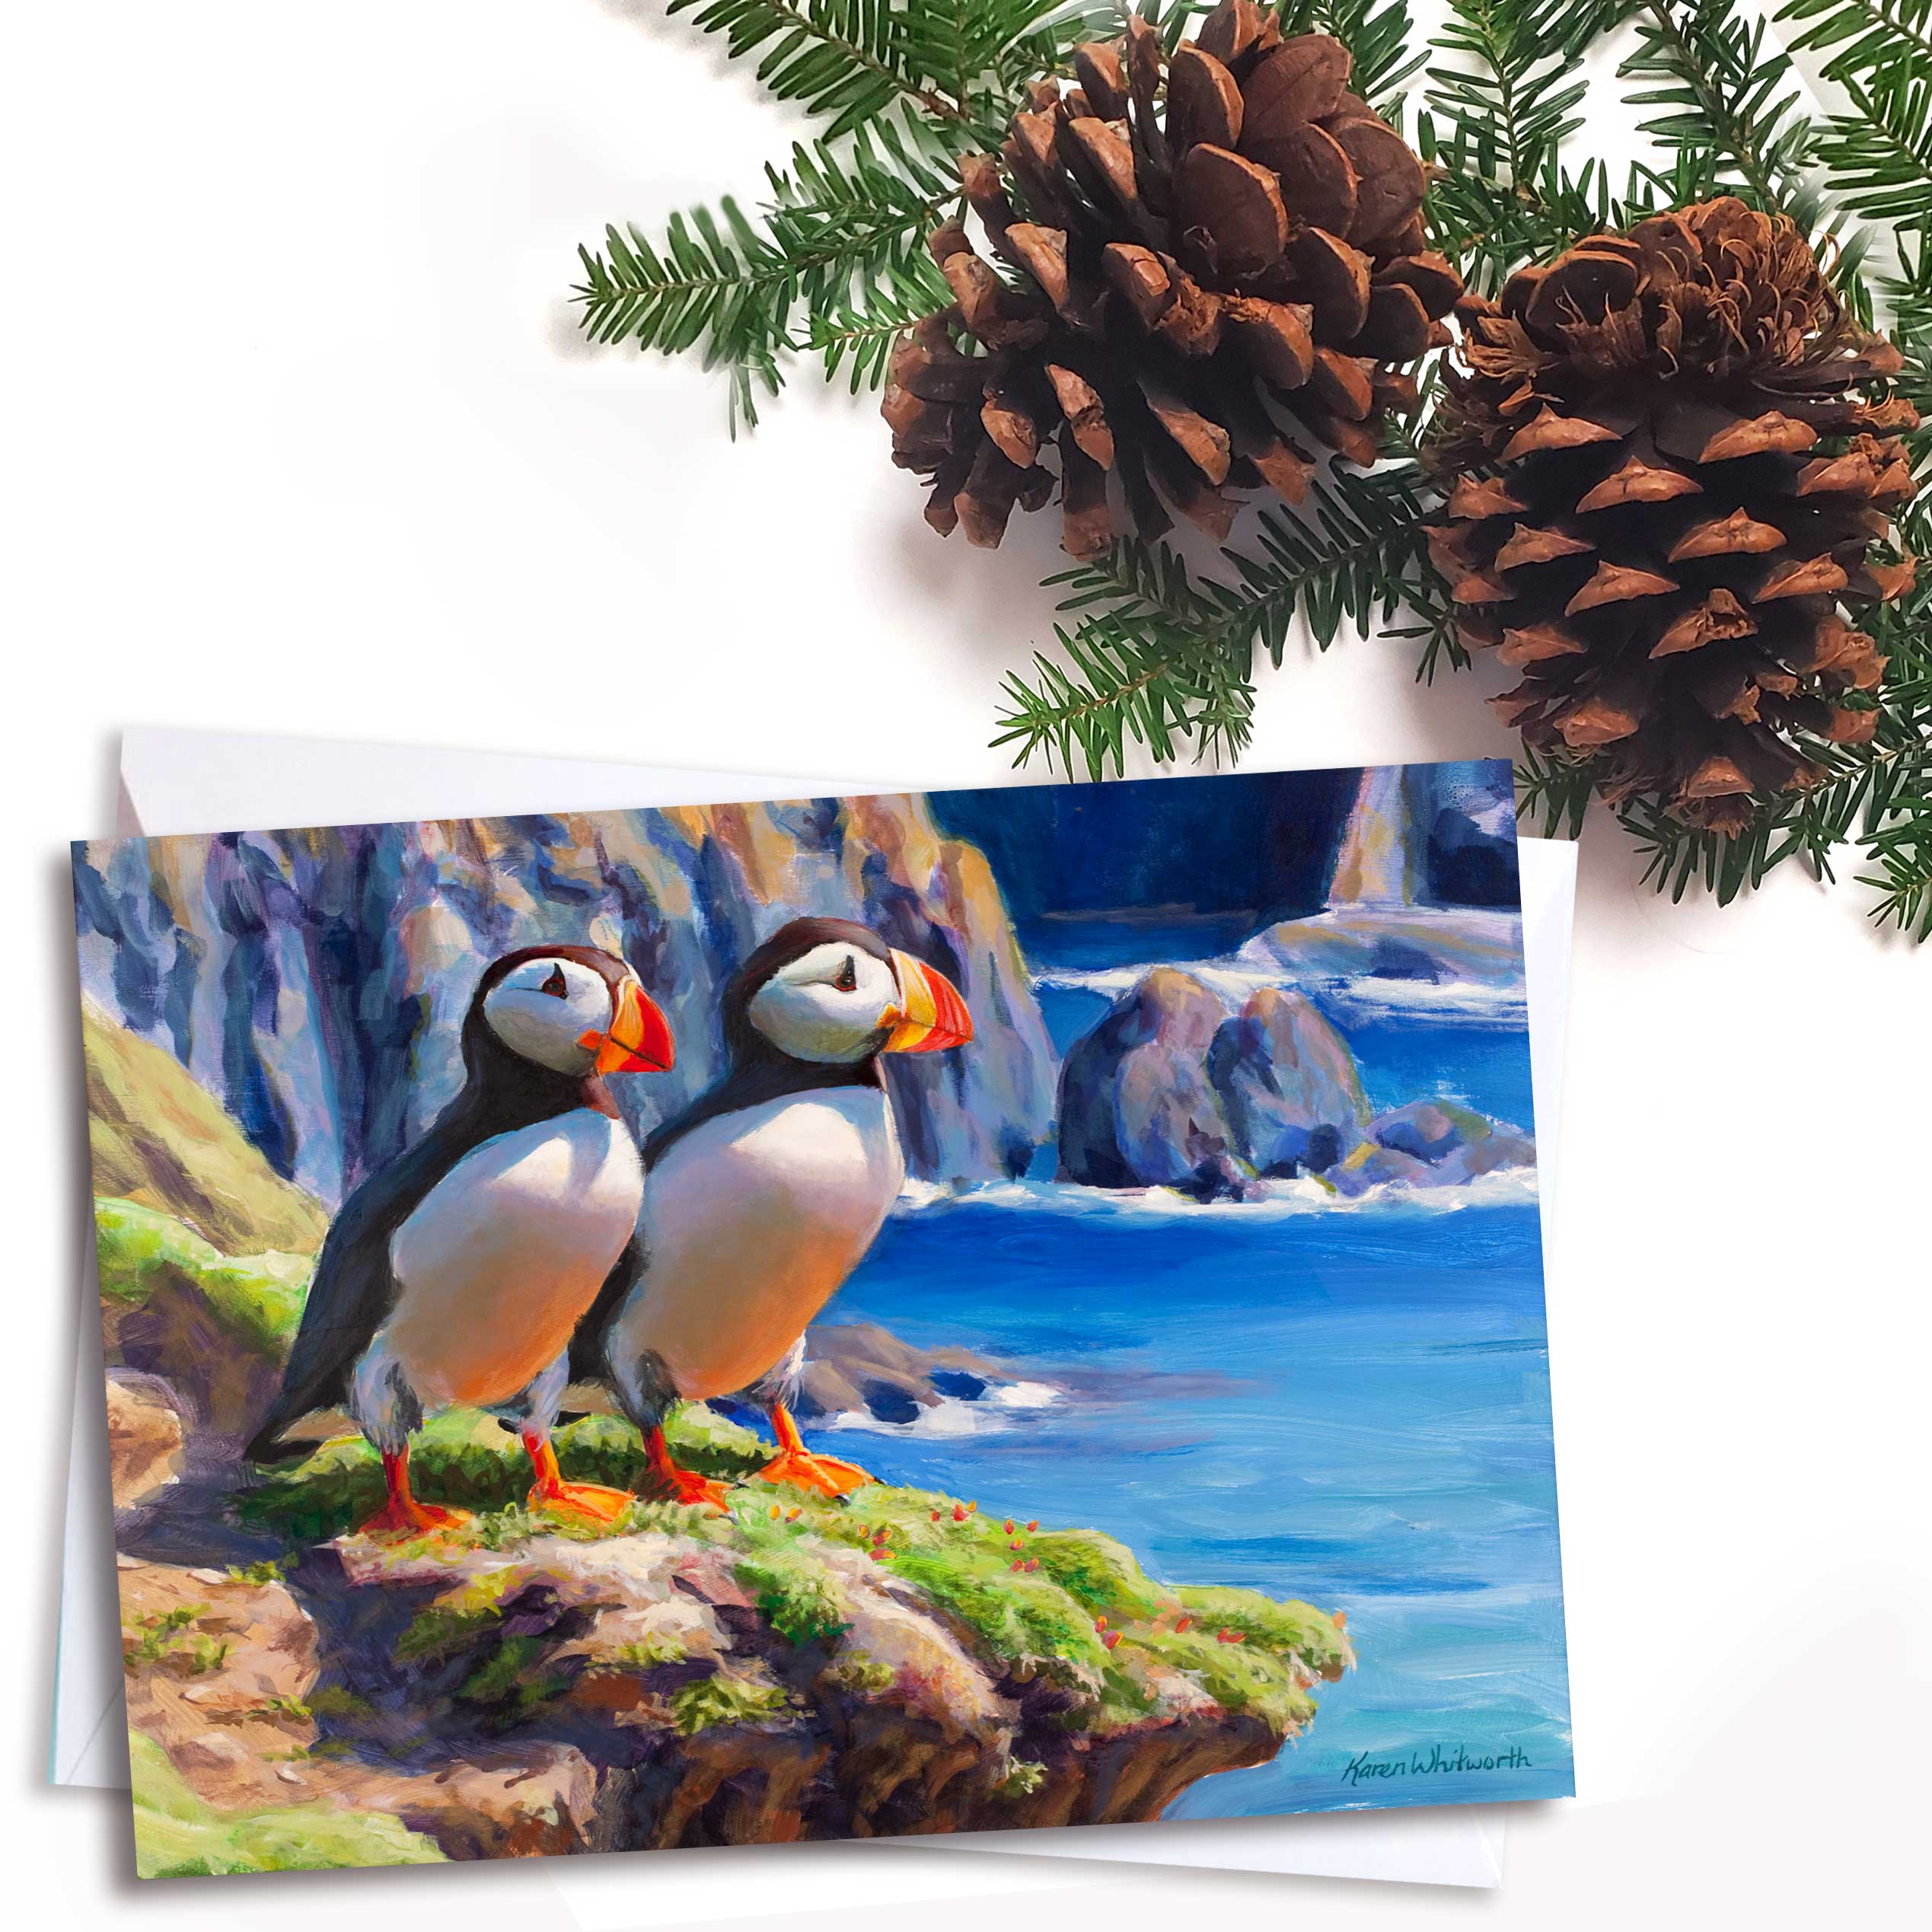 Puffins on the costal shores greeting card by Alaska artist Karen Whitworth